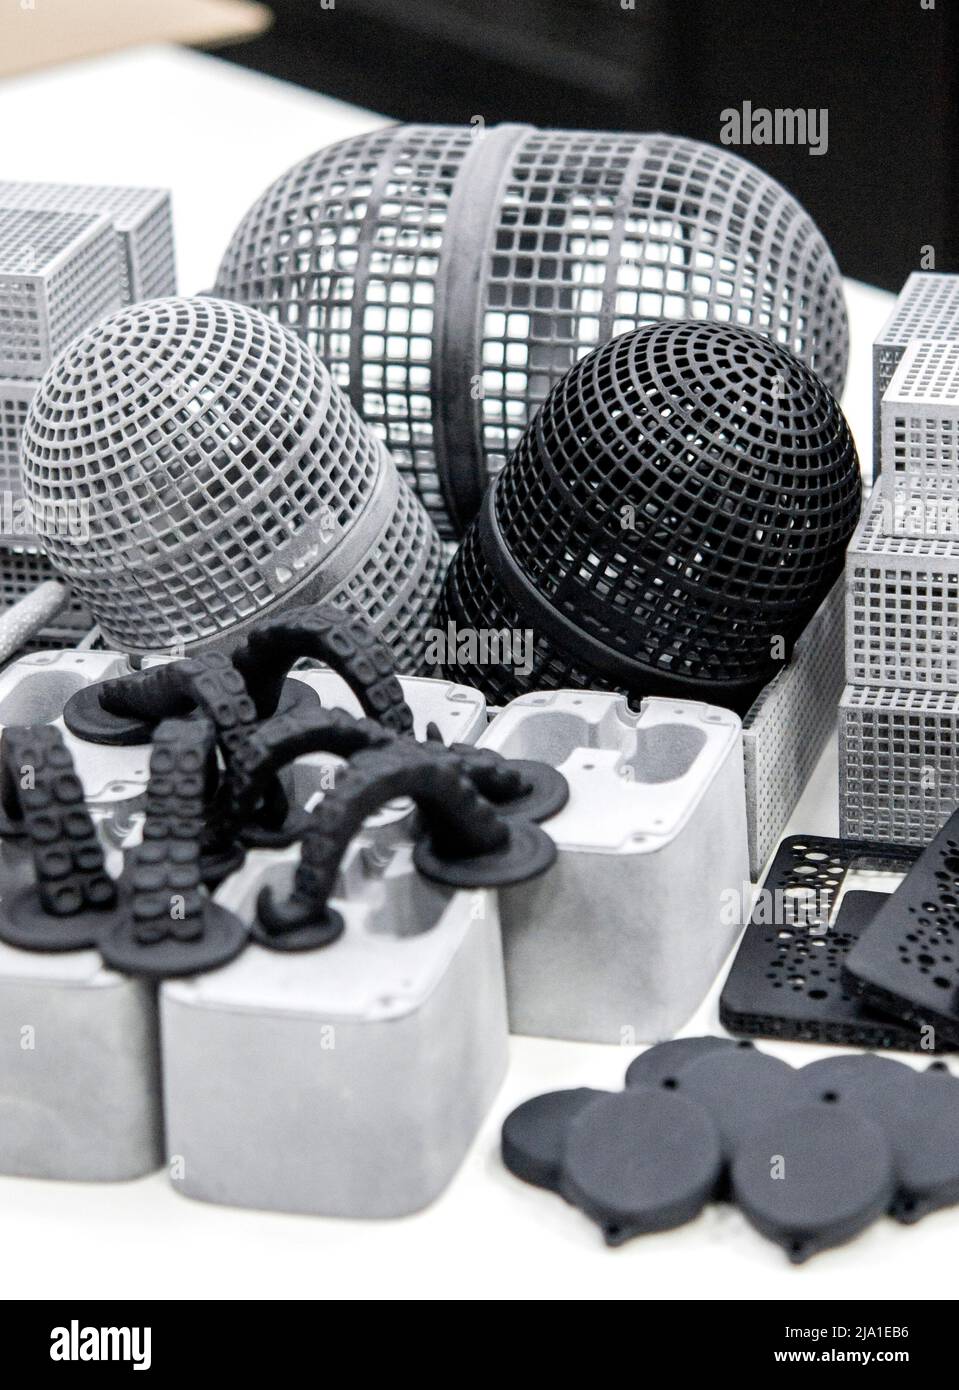 Many different objects printed on 3D printer from powder polyamide. Models printed on industrial 3D printer. Modern new prototyping technology. Additive automation manufacturing 3D printing technology Stock Photo